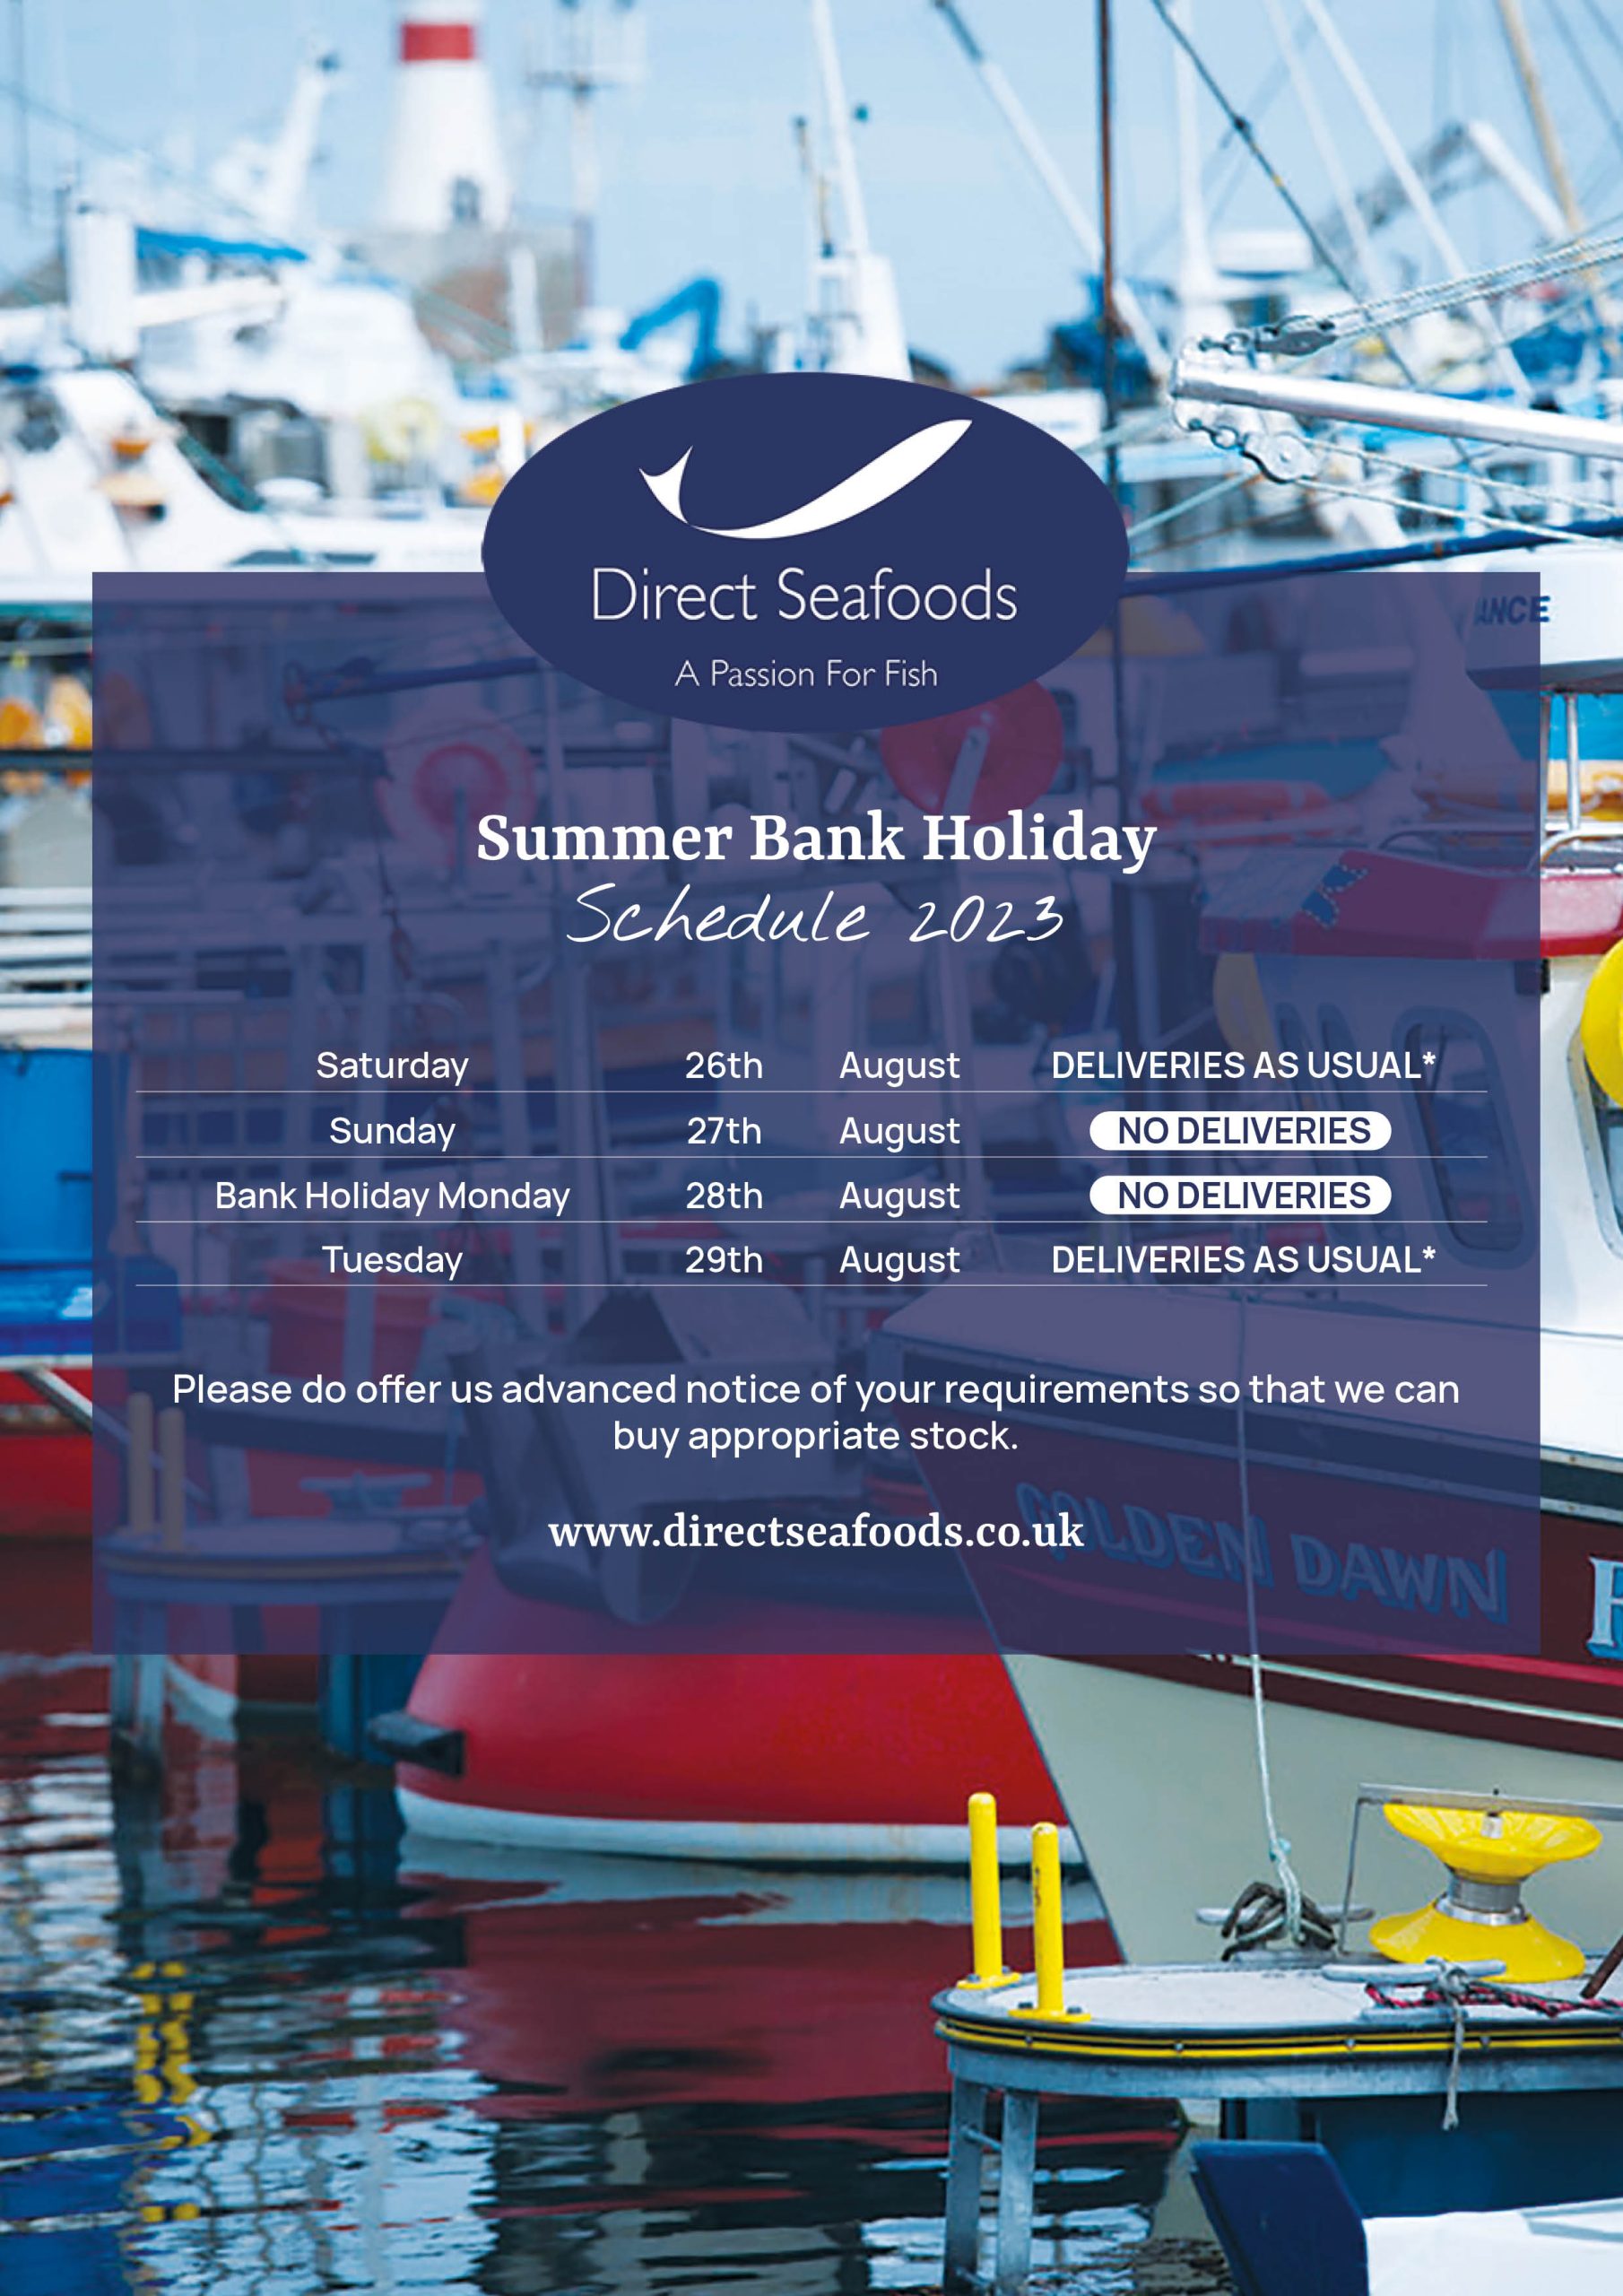 Bank holiday schedule from Direct Seafoods